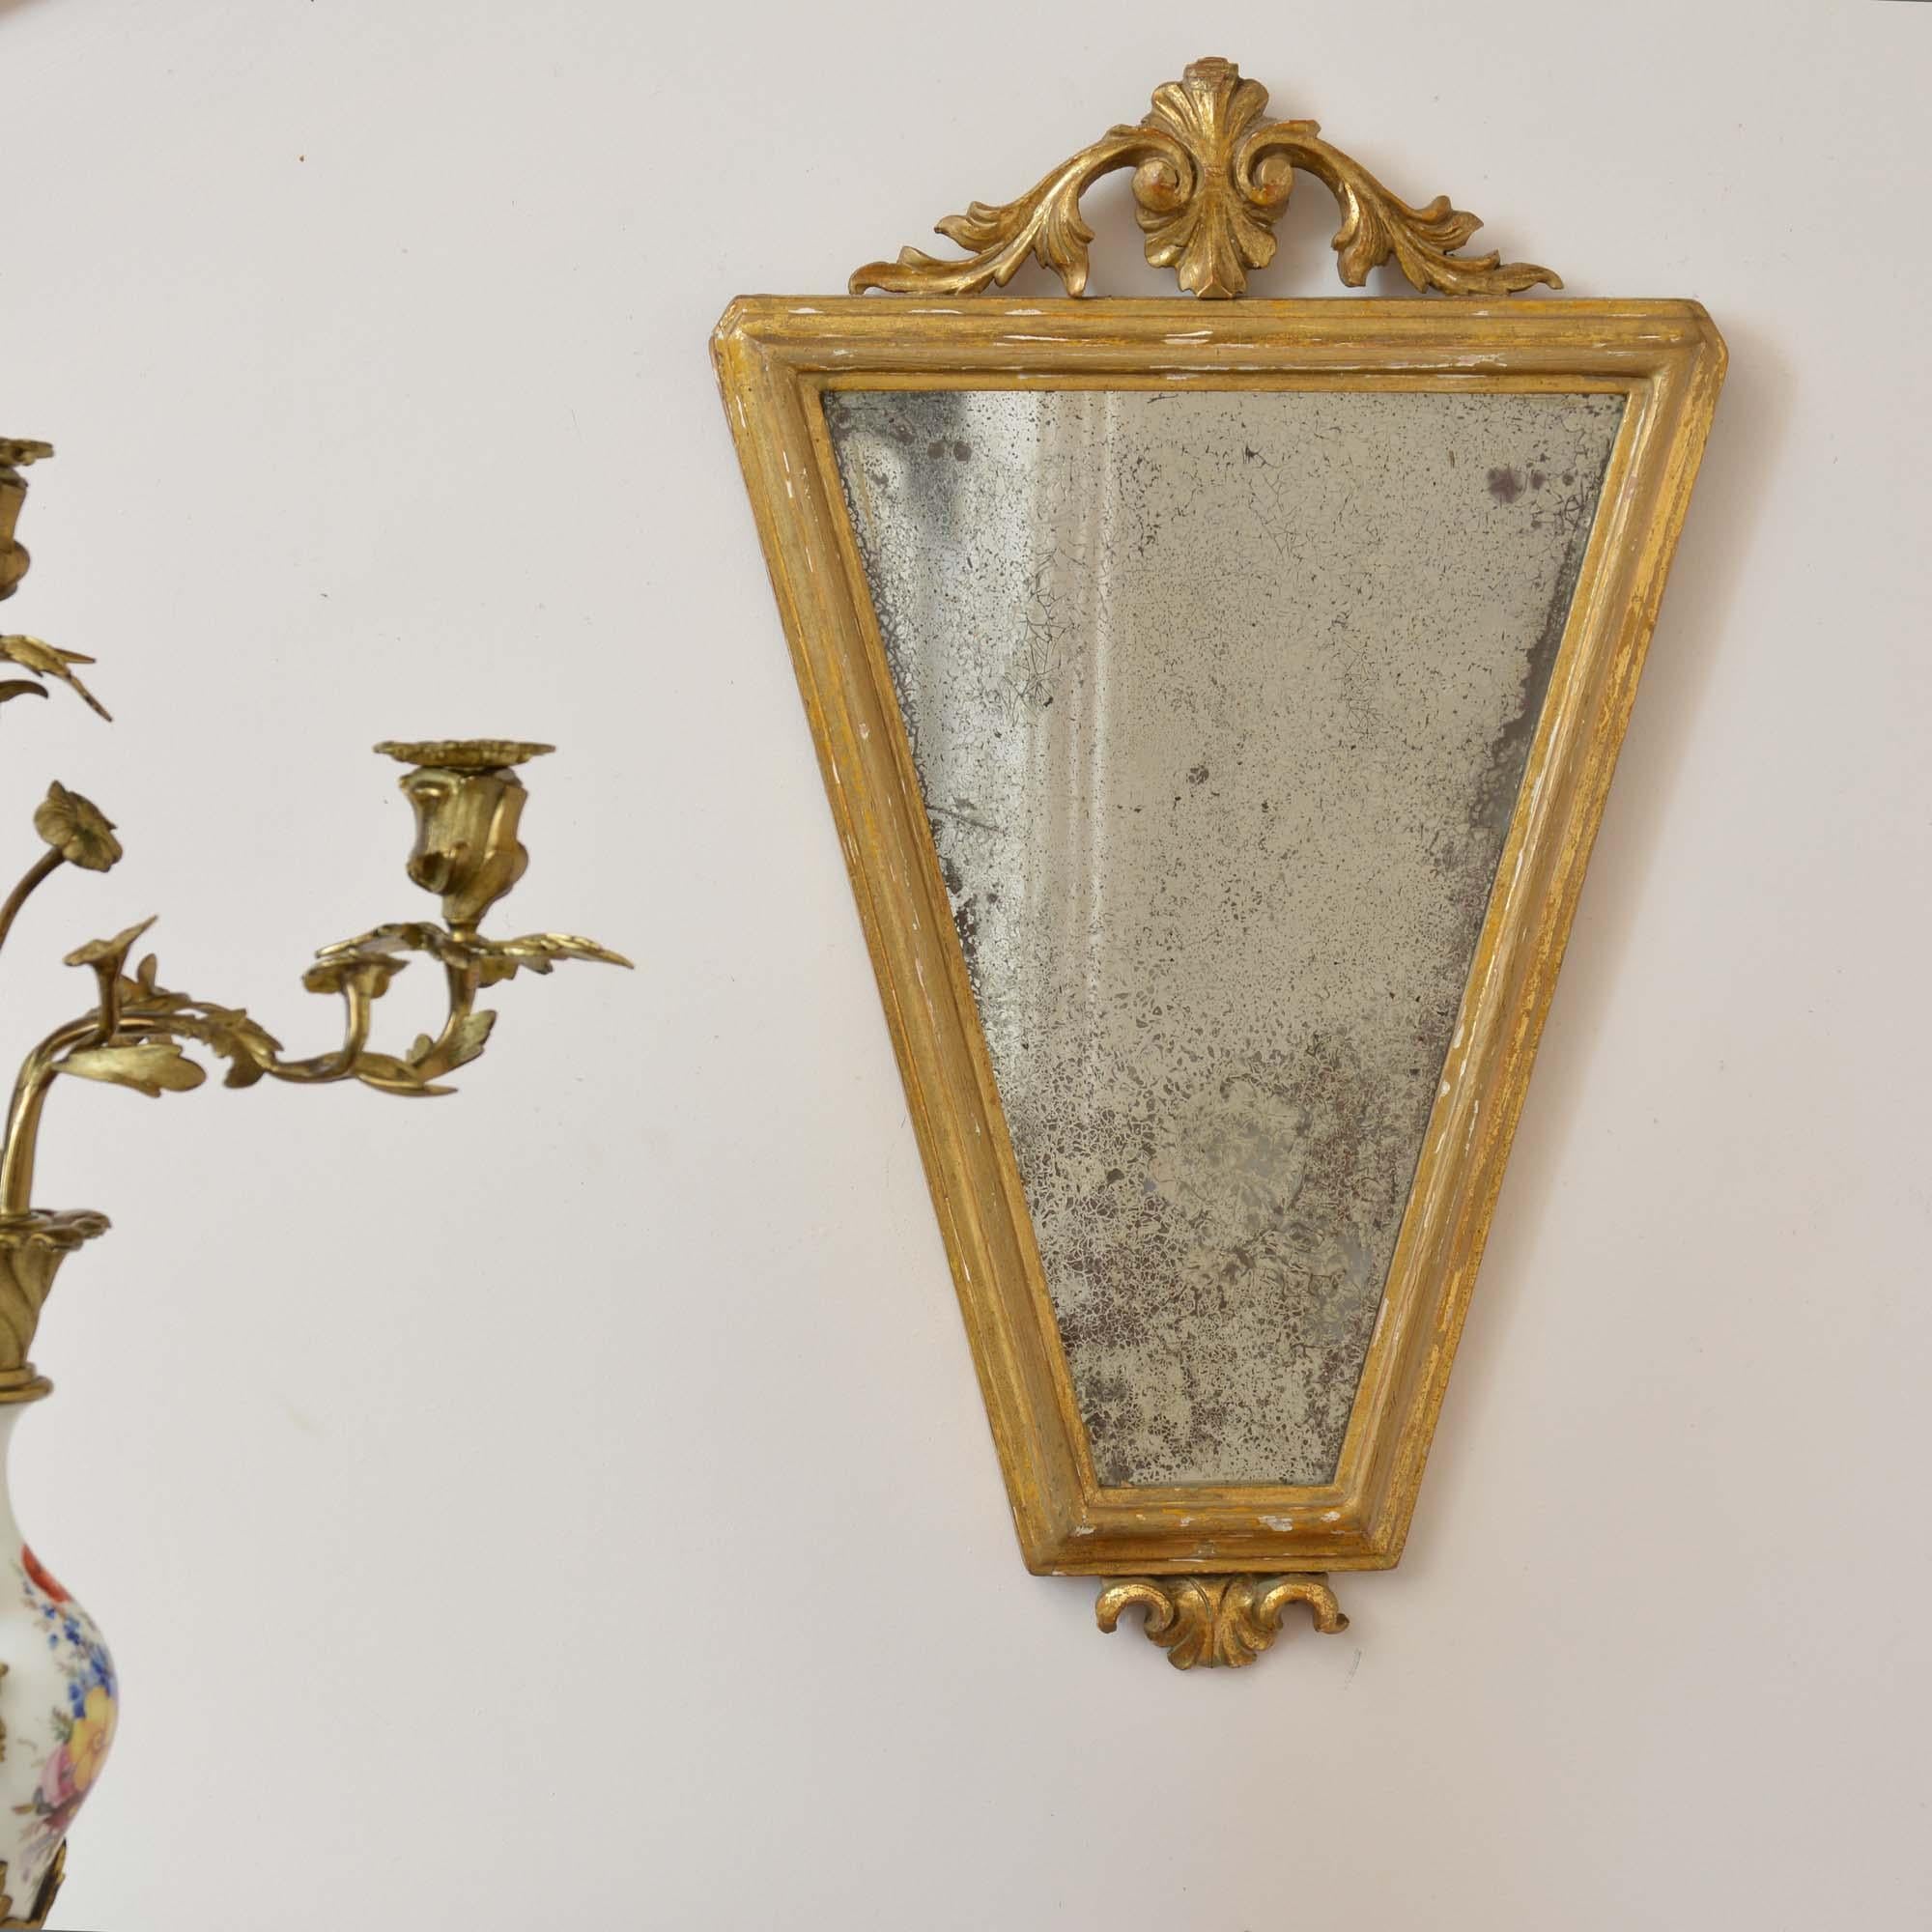 George II tapering giltwood mirror
Of elegant tapering form with a carved and rubbed water gilded frame, the lower foliate carving is missing its finial, the original mirror plate is wonderfully foxed. 
English, circa 1740.